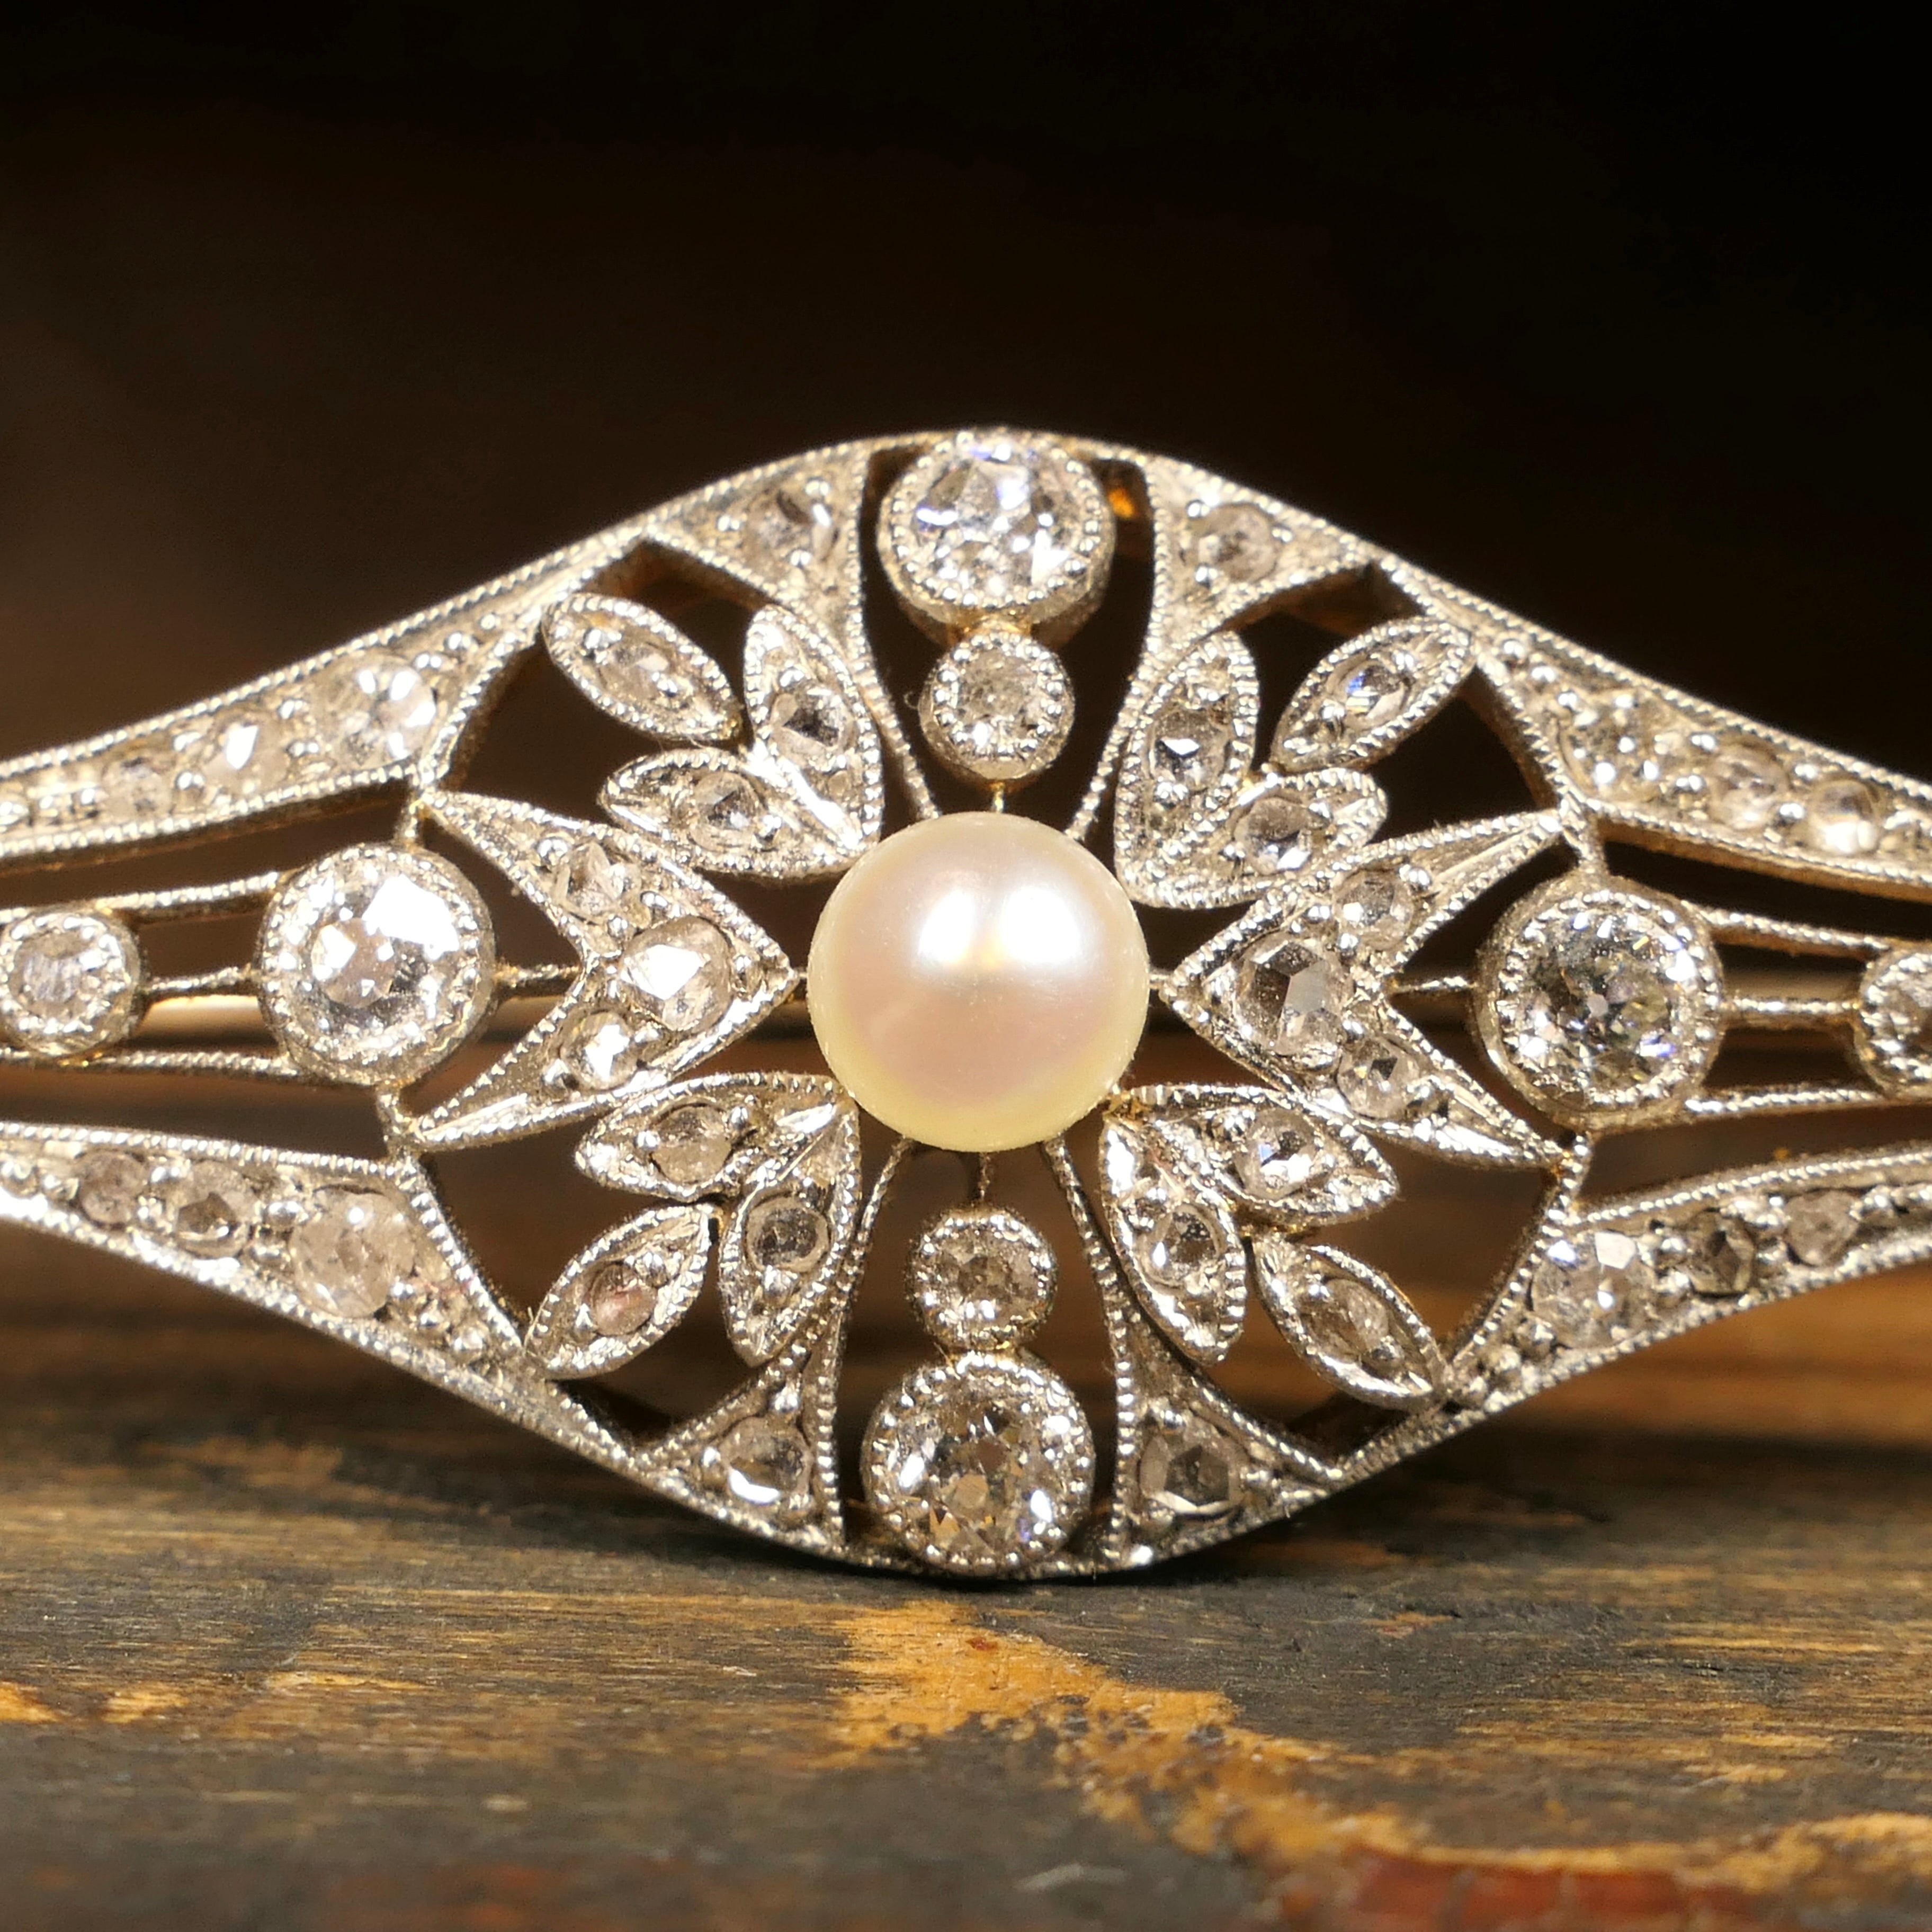 Edwardian, 18ct Gold & Silver, Old cut Diamond and Pearl brooch